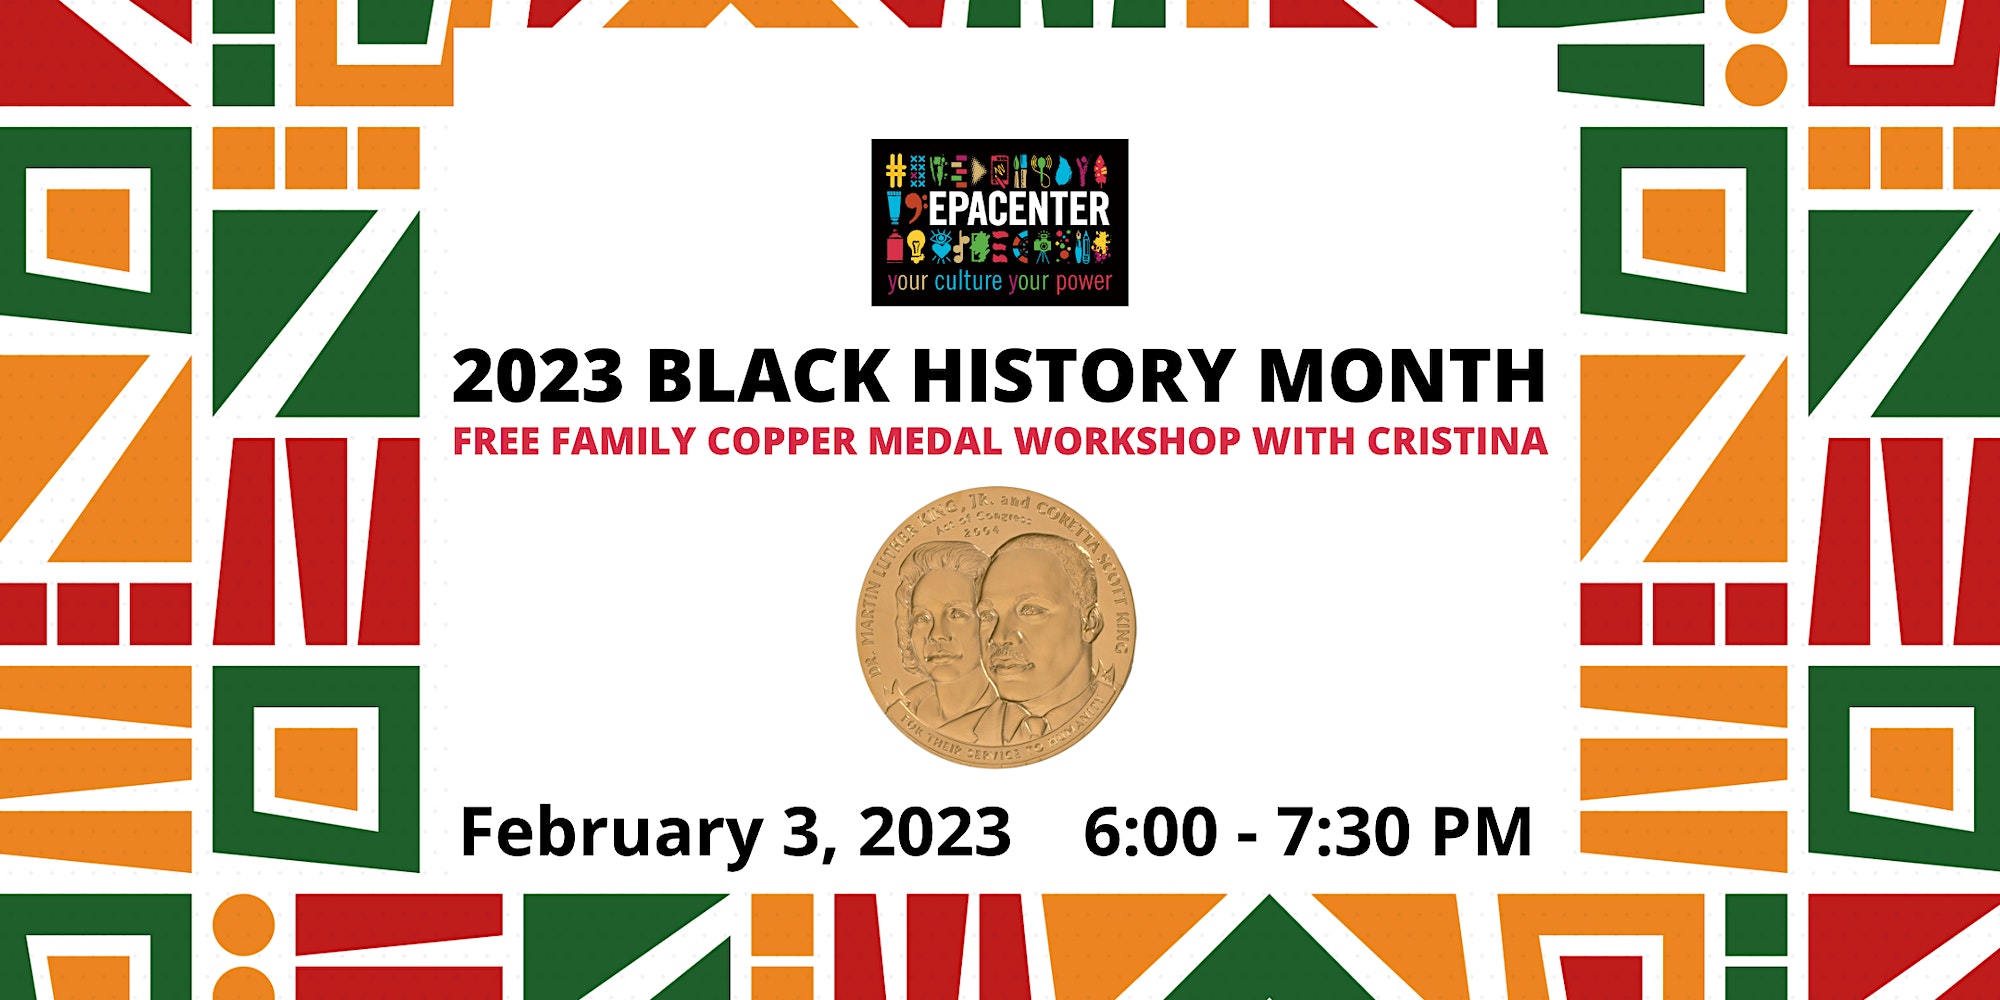 EPACENTER Black History Month Celebration – Freedom Medals with Cristina